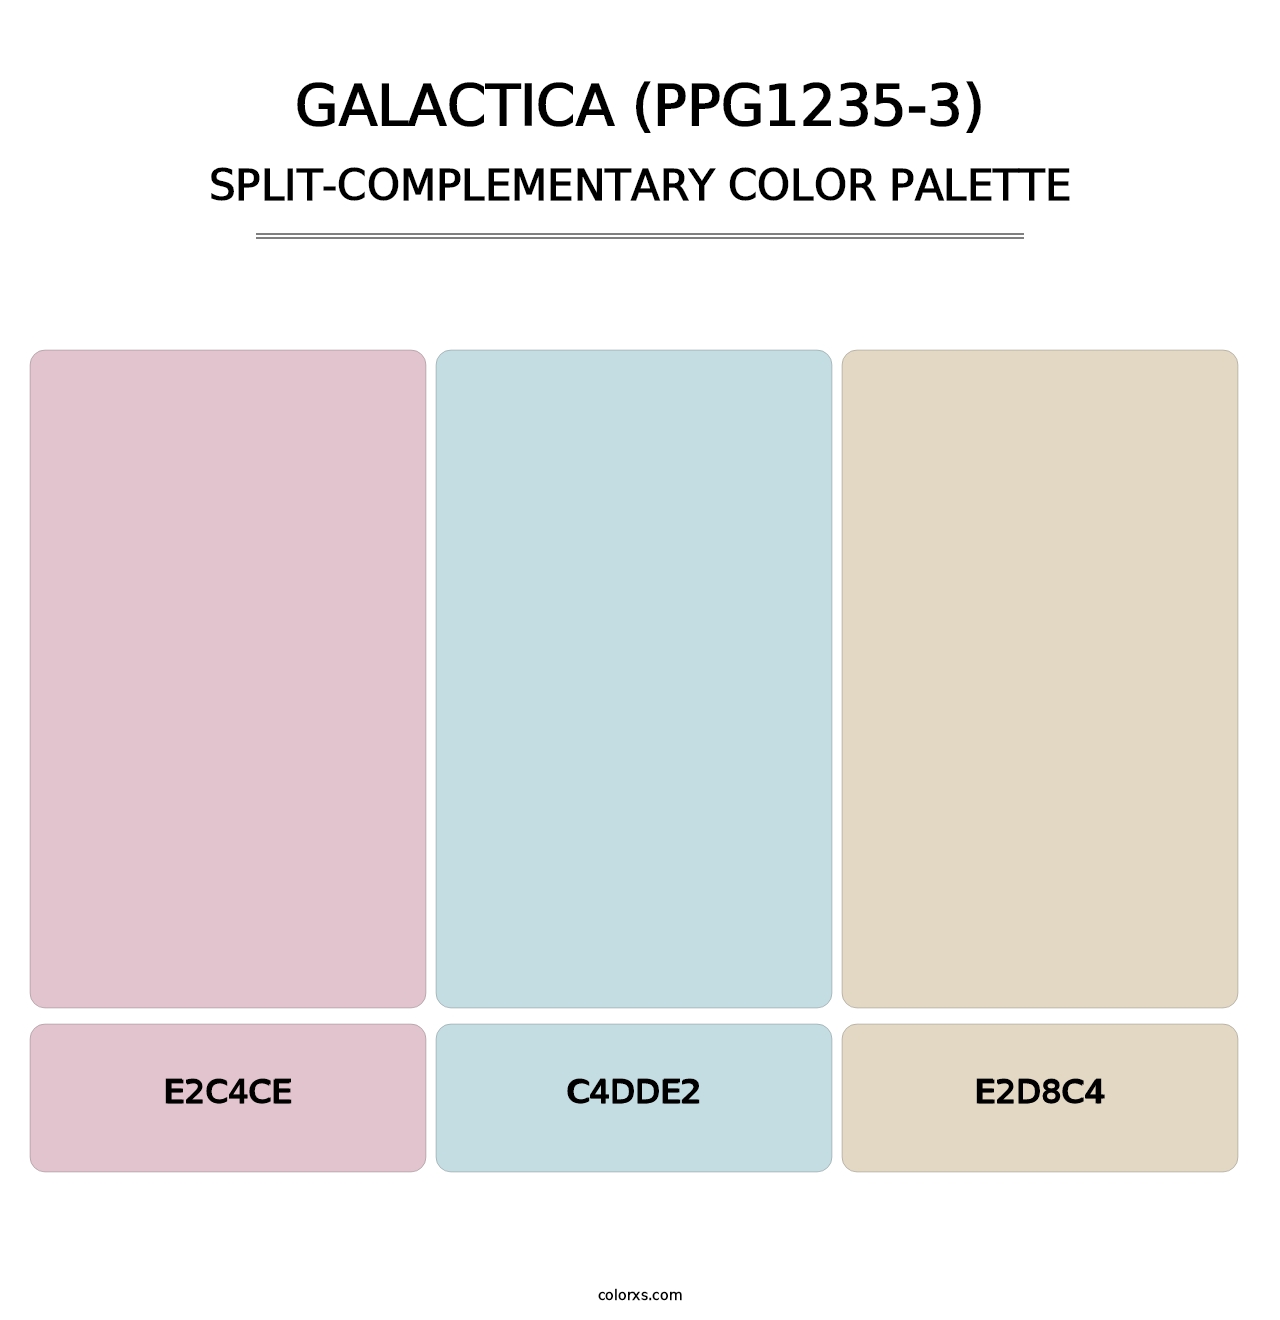 Galactica (PPG1235-3) - Split-Complementary Color Palette